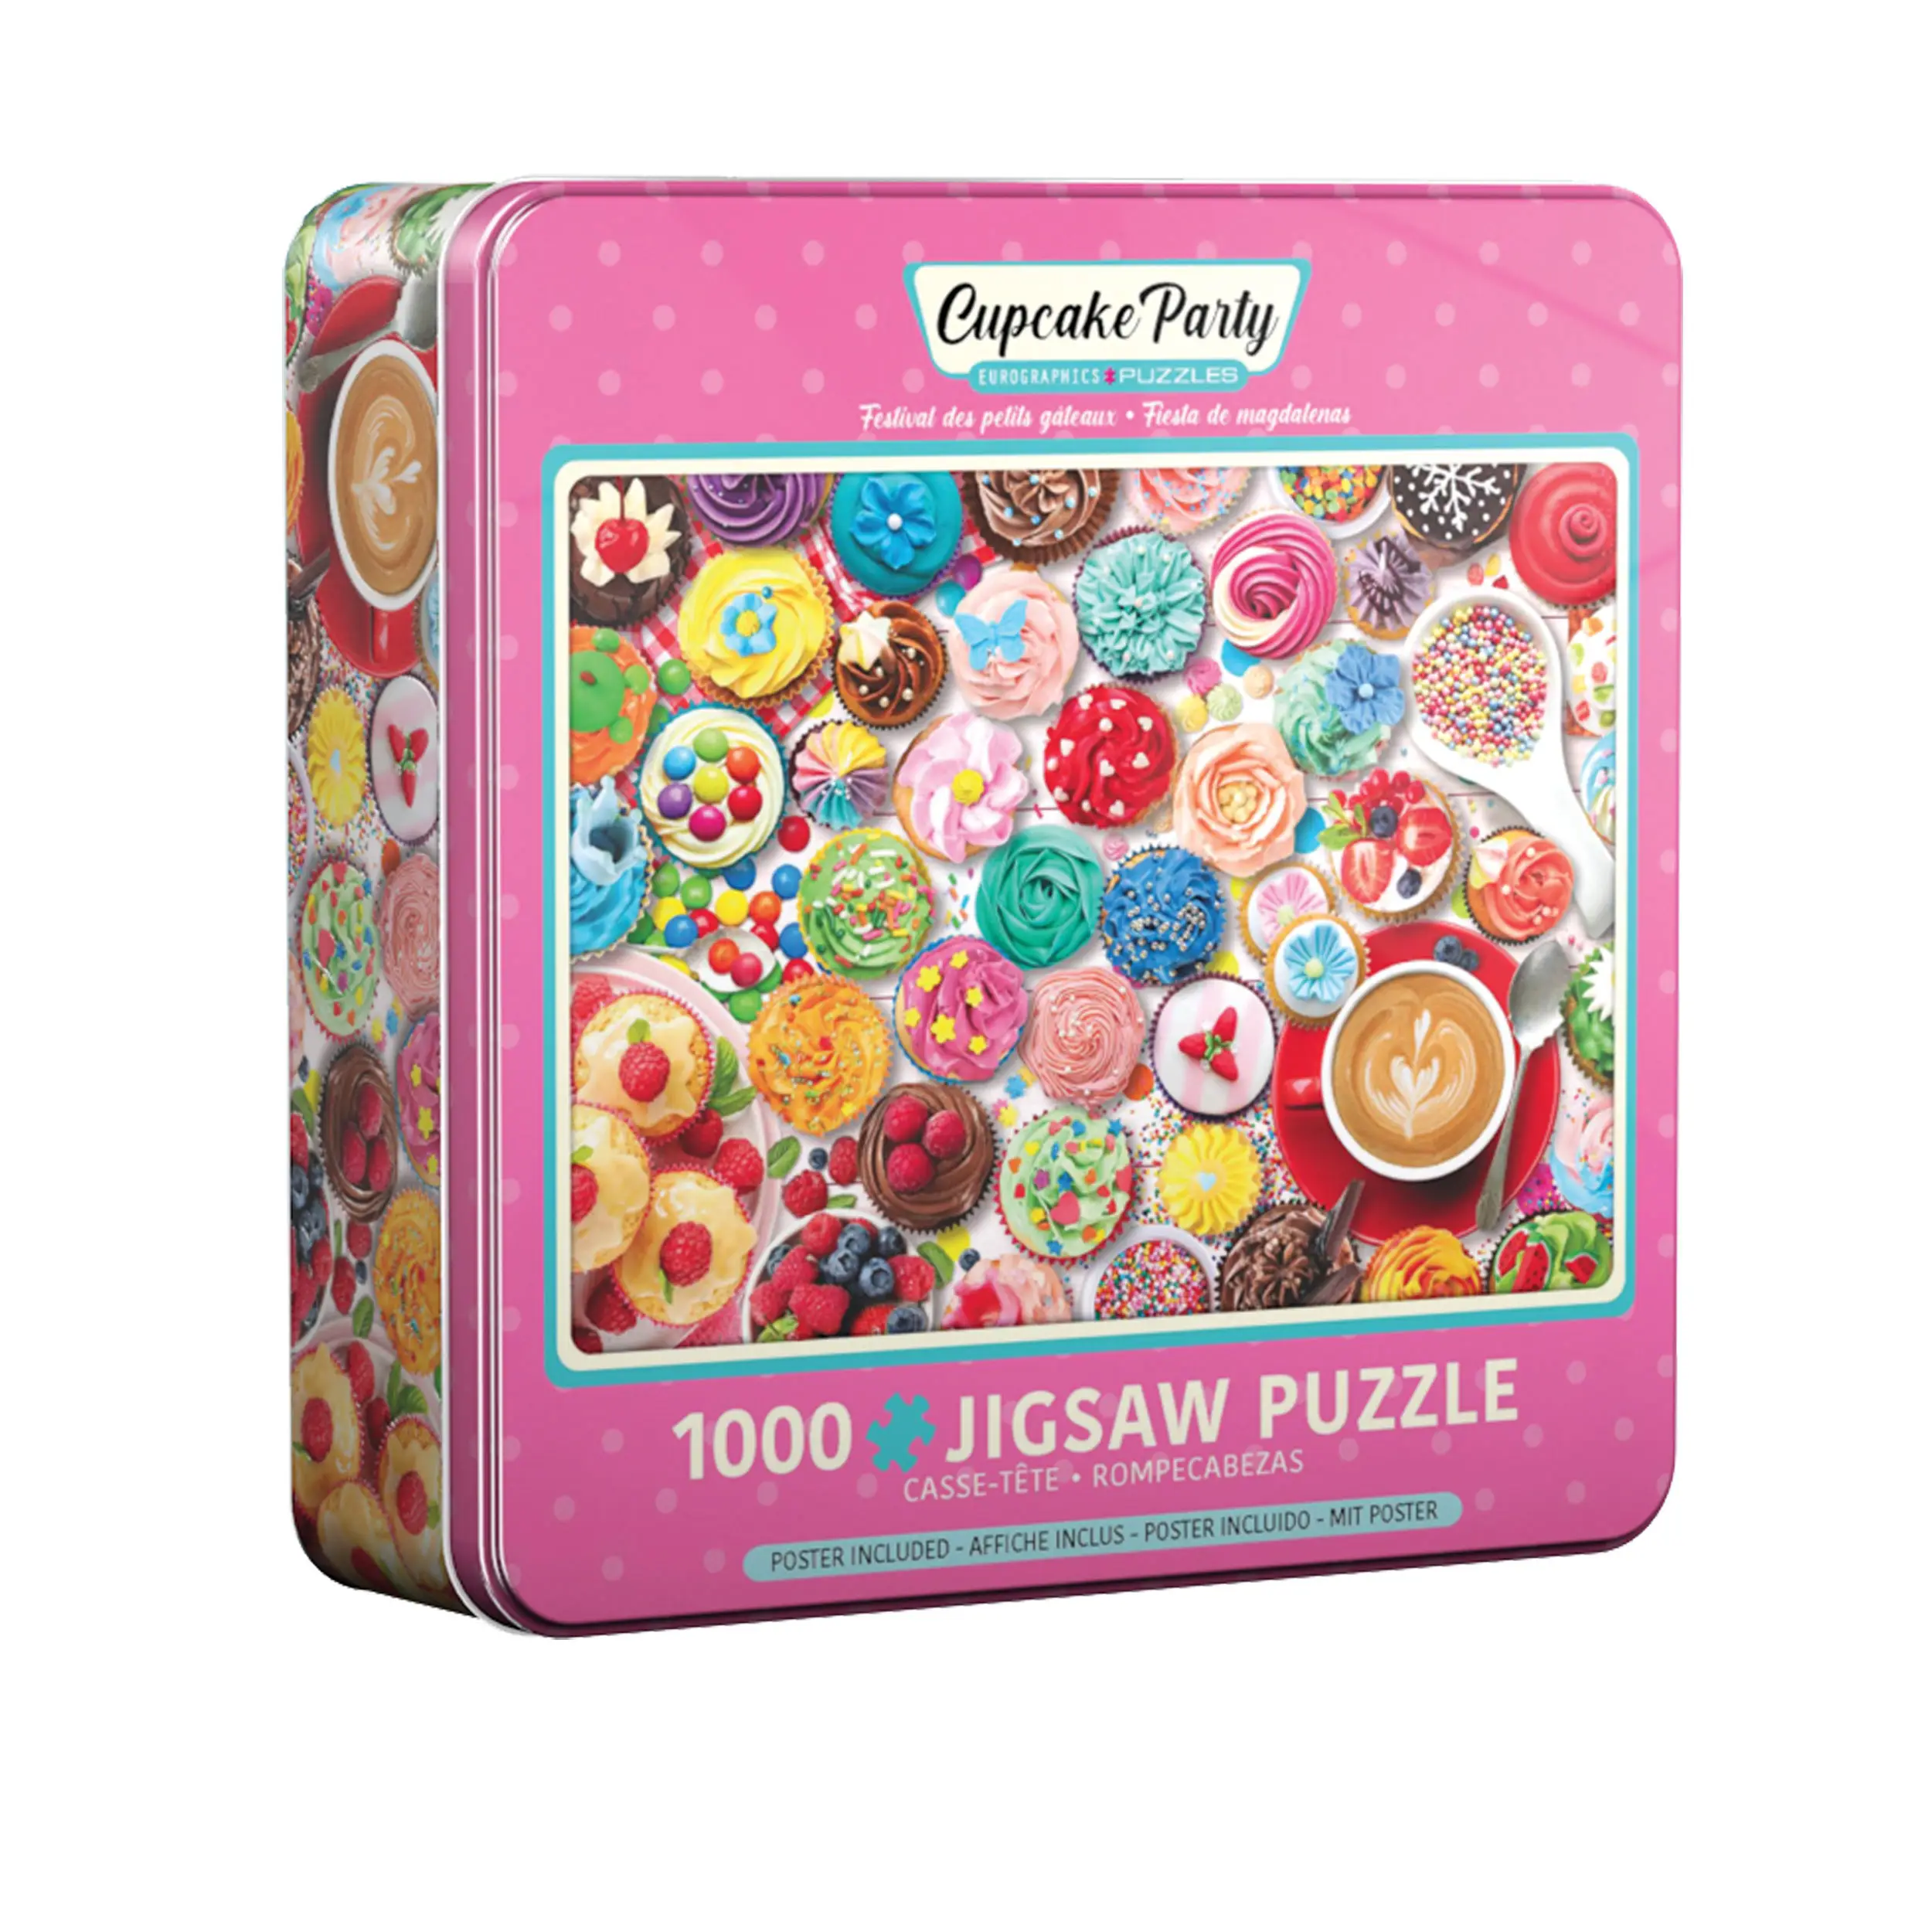 Puzzle Cupcake Party in Puzzledose